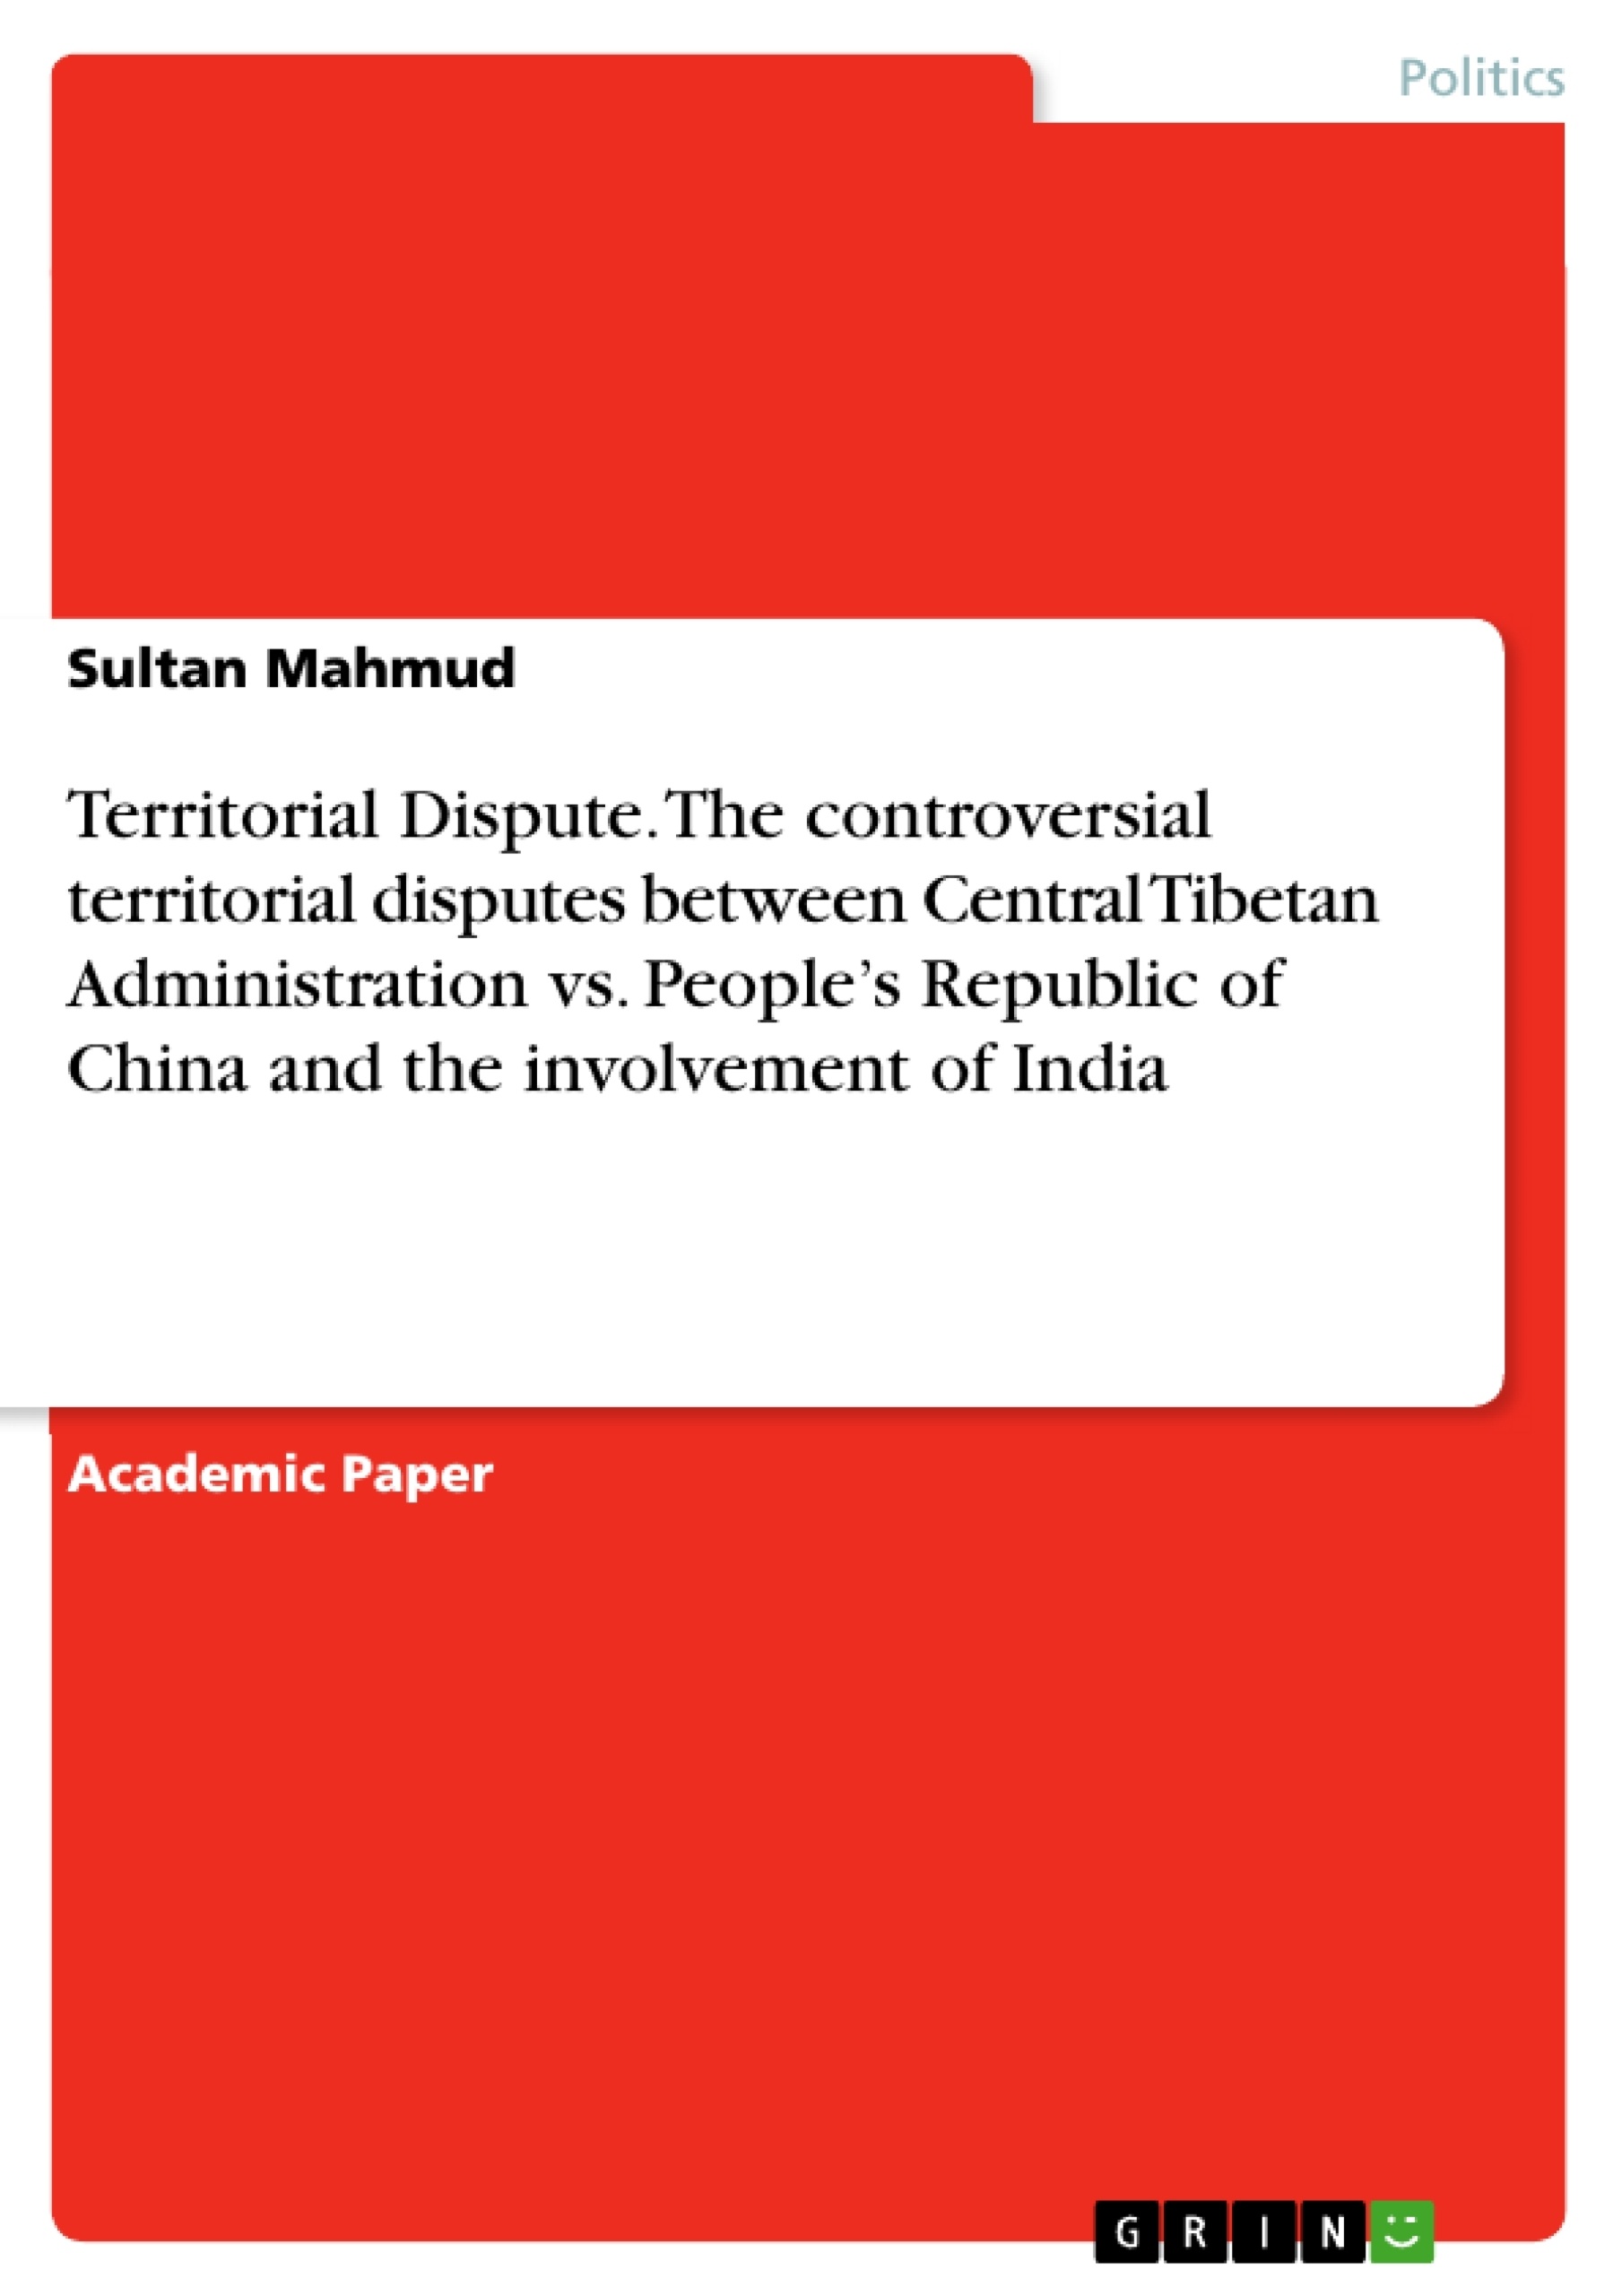 Titre: Territorial Dispute. The controversial territorial disputes between Central Tibetan Administration vs. People’s Republic of China and the involvement of India